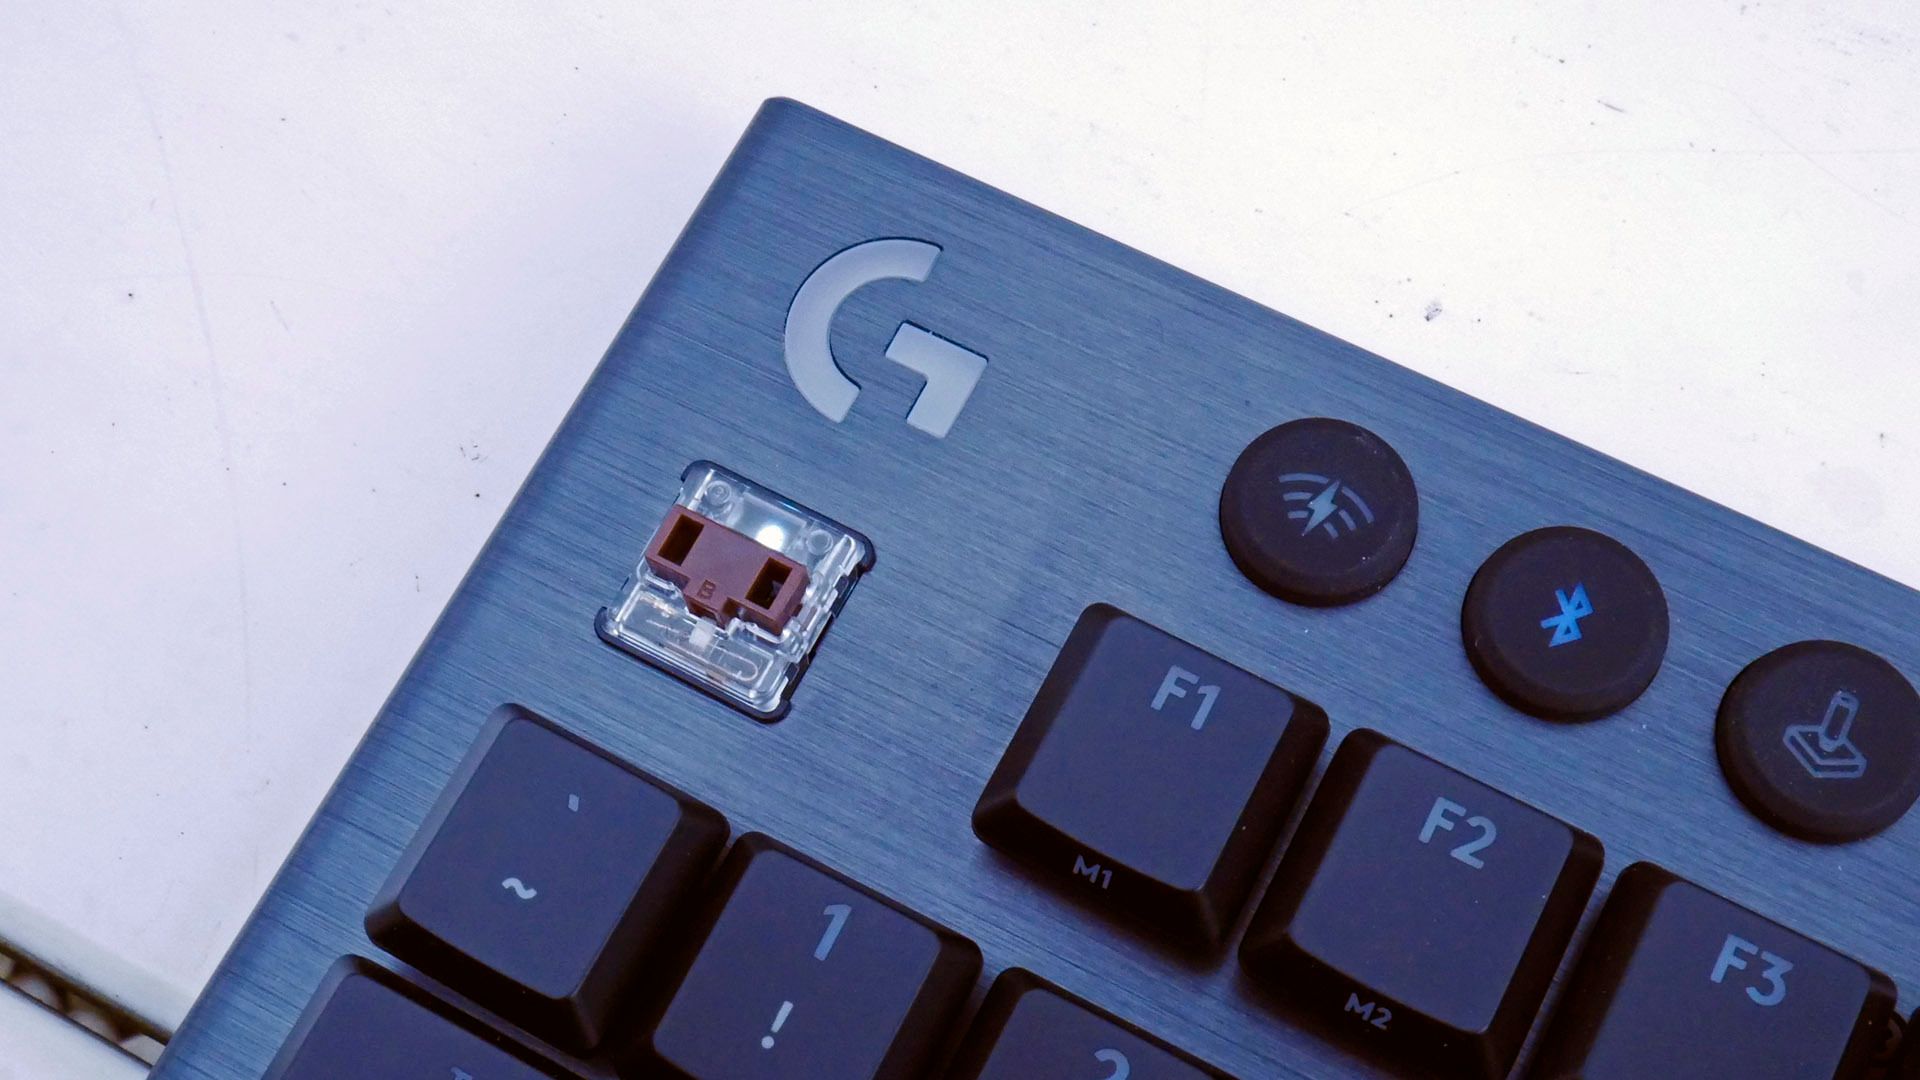 GL Tactile switch on G915